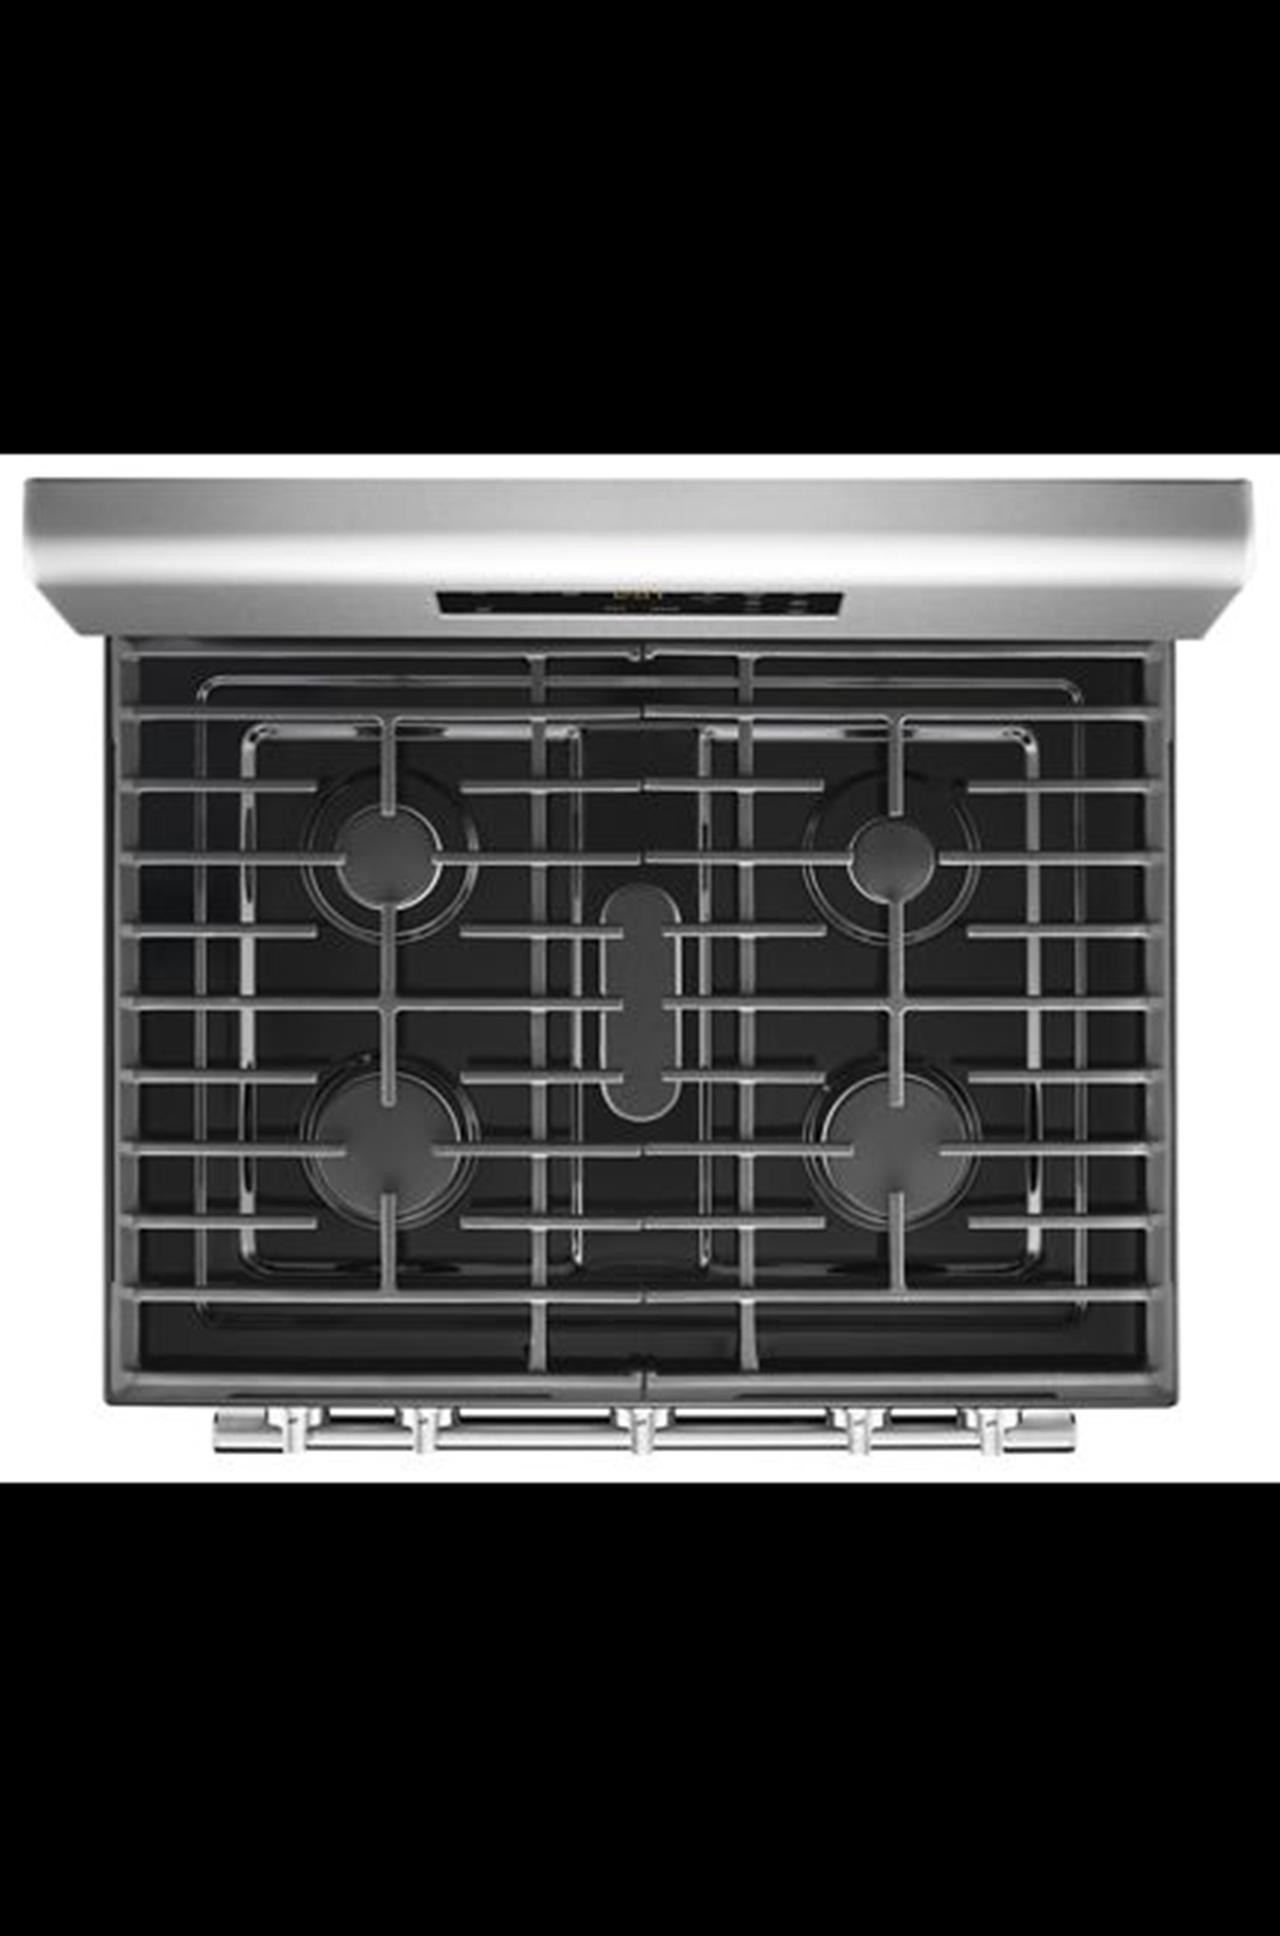 Sargents Maytag Home Appliance Sales and Service | Reno, Sparks, NV